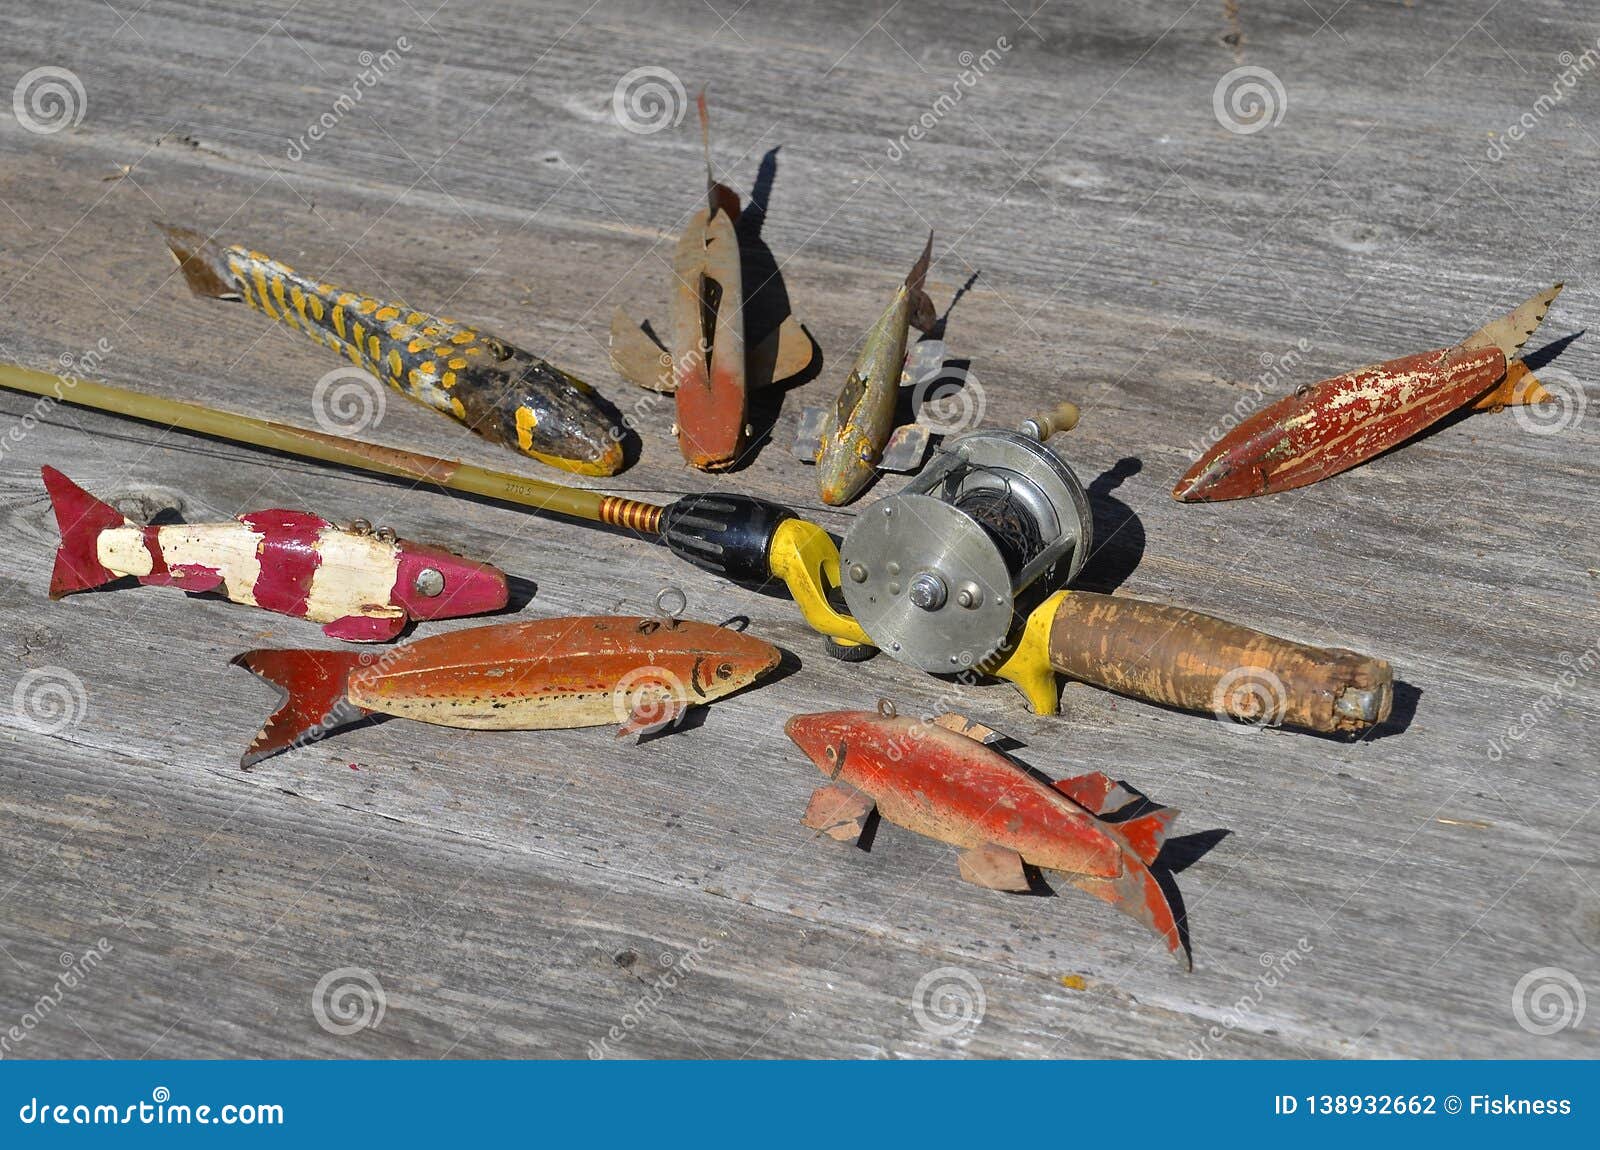 Home made fishing lures stock photo. Image of retro - 138932662